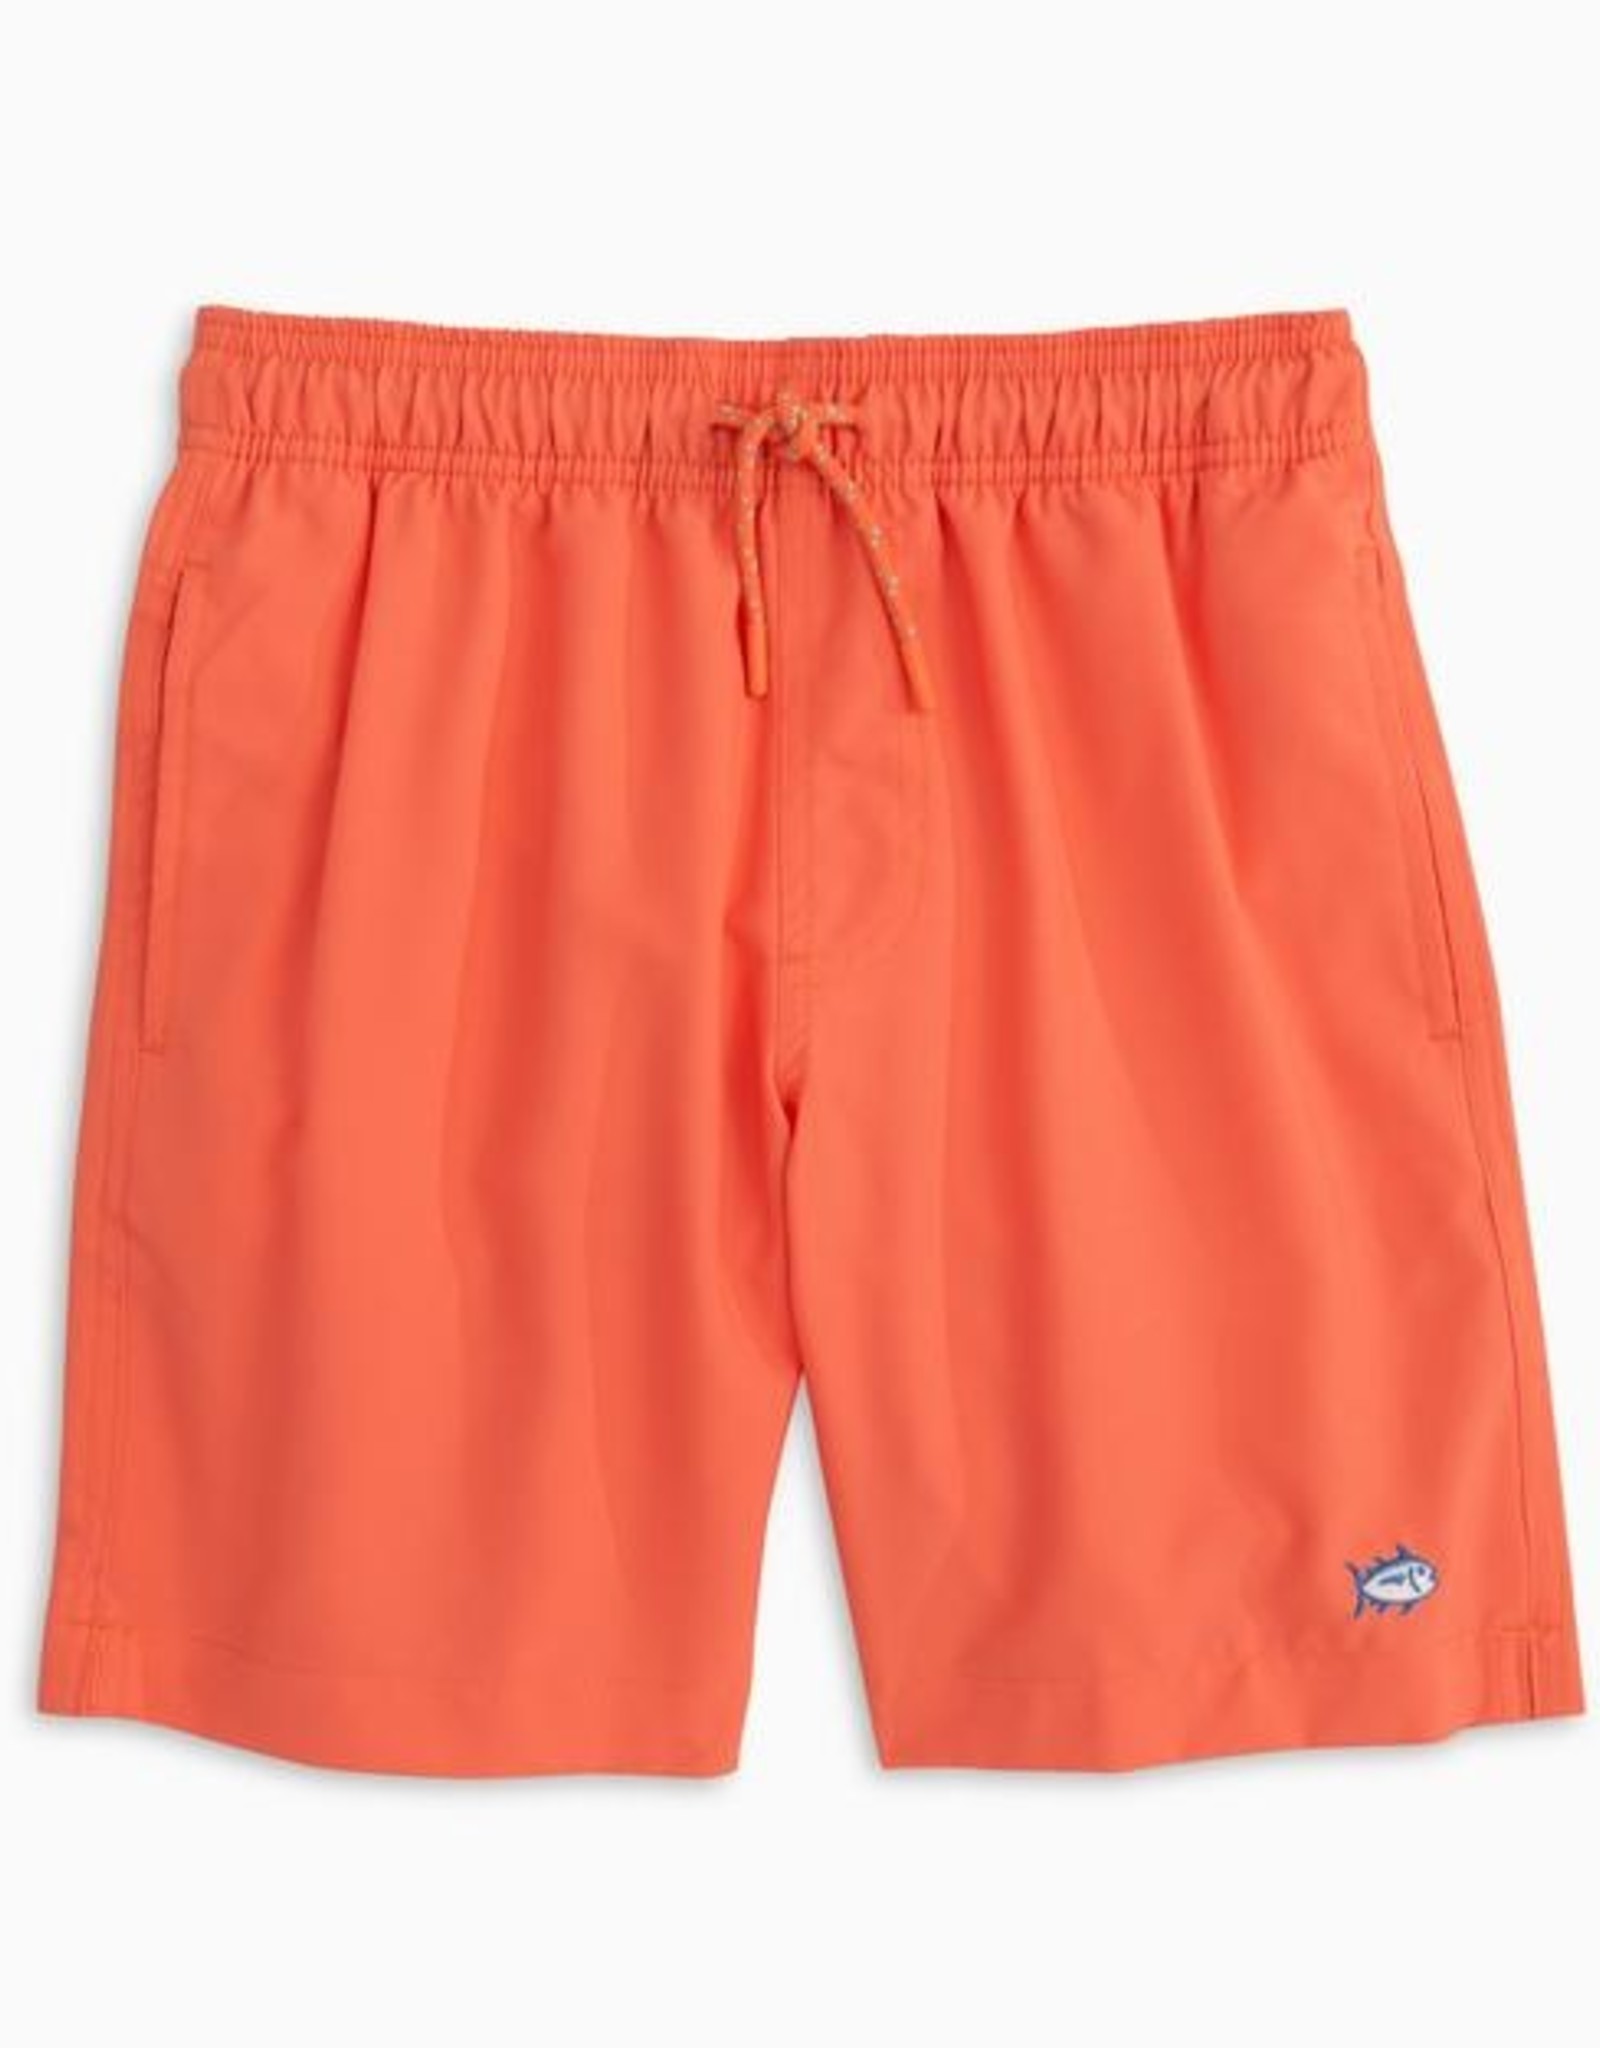 Southern Tide Youth Solid Swim Trunk